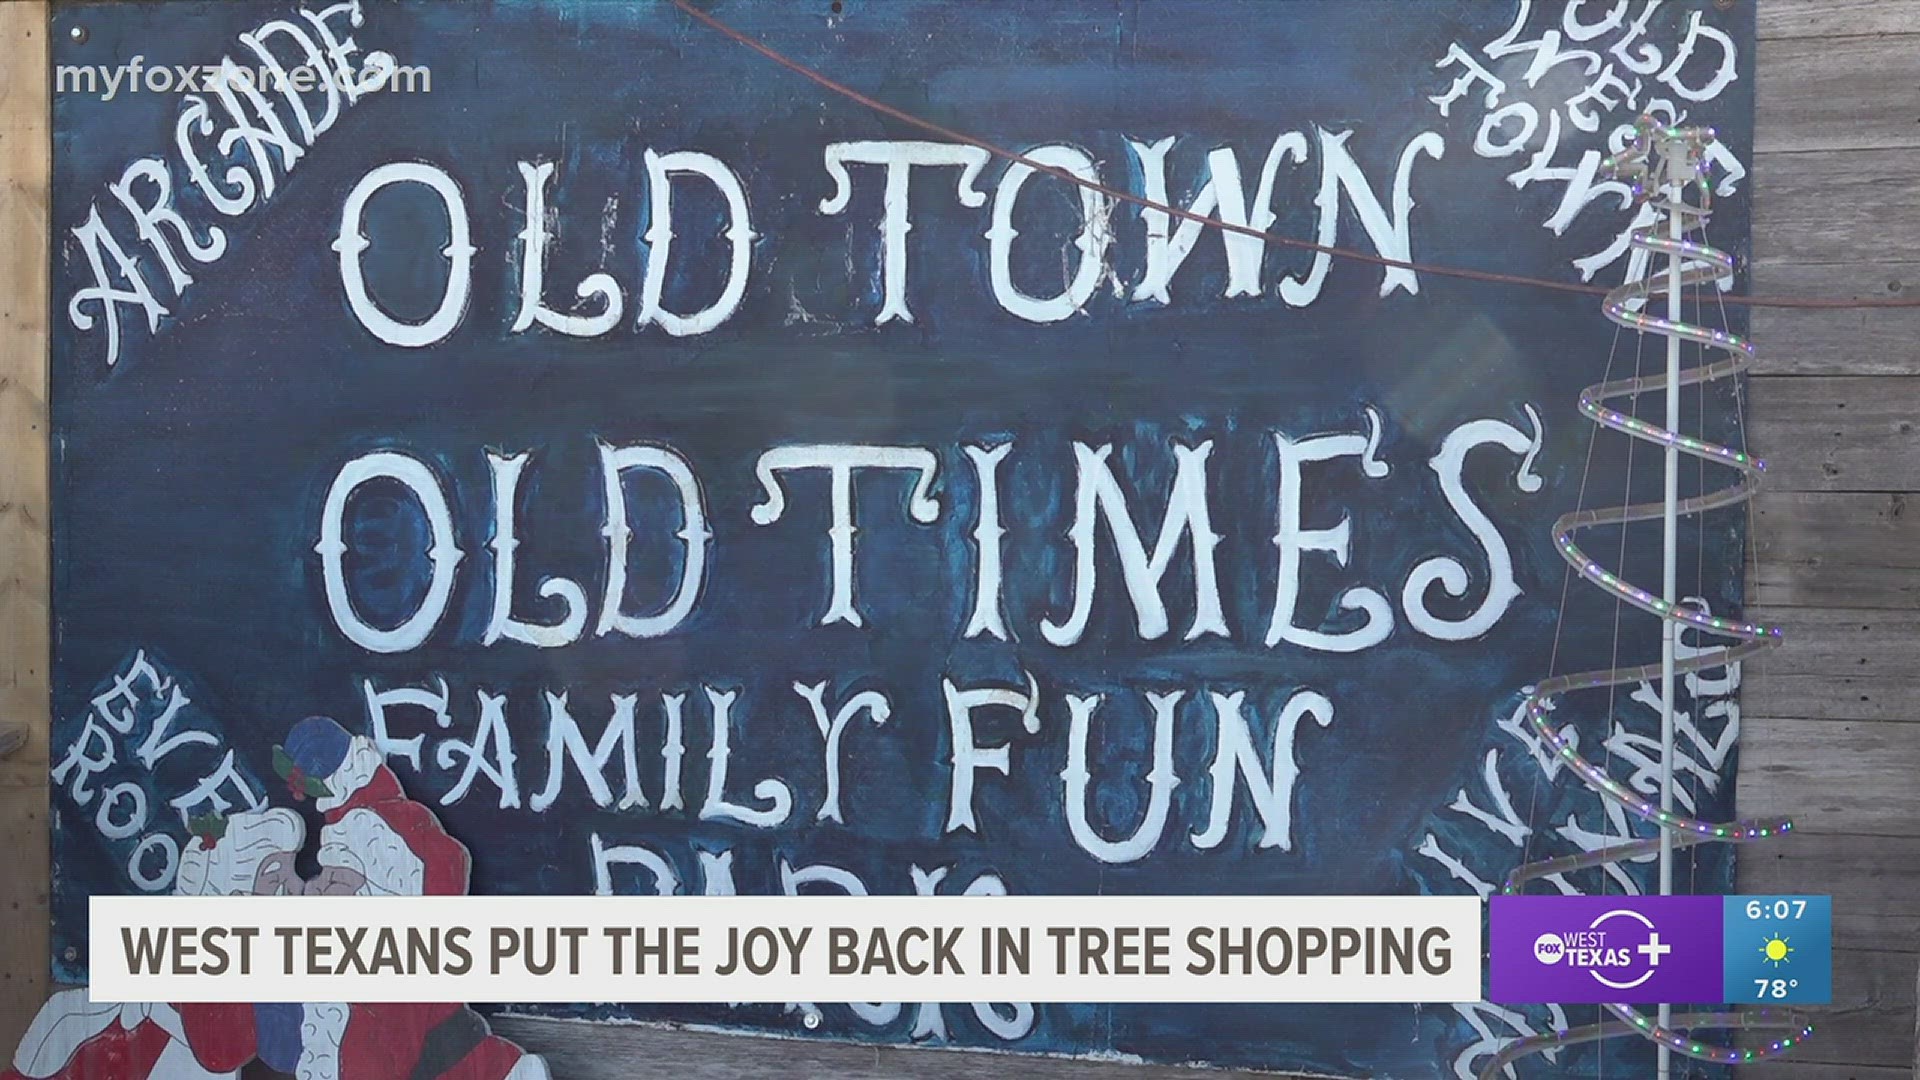 Old Town Old Times offers a unique tree buying experience.